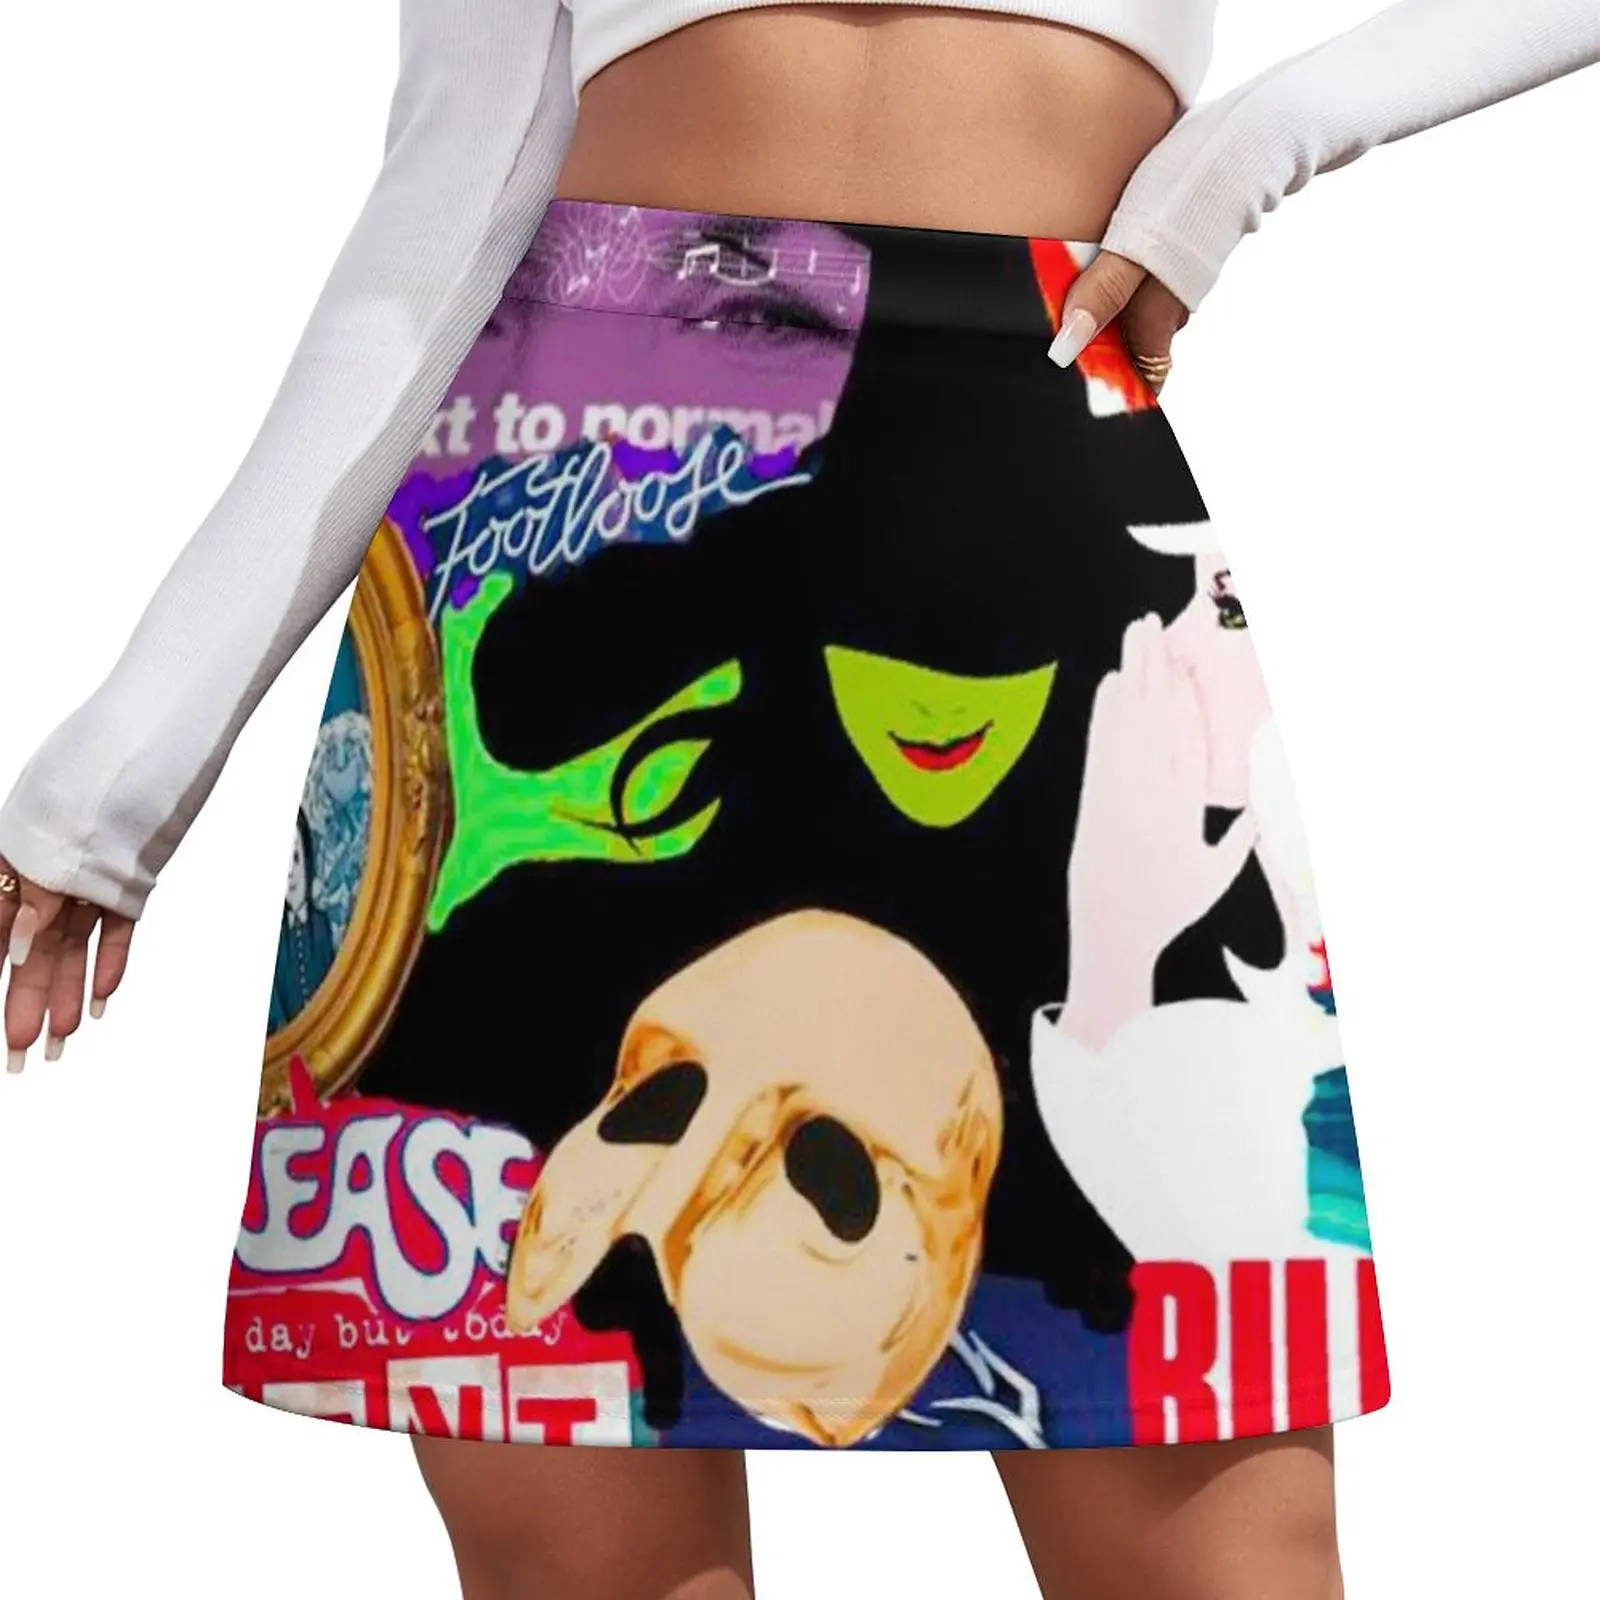 Broadway Musical Collage Mini Skirt chic and elegant woman skirt women's summer clothing 2024 50pcs pack self adhesive mini book washi paper diy decor stationery scrapbooking collage vintage material paper sticker book